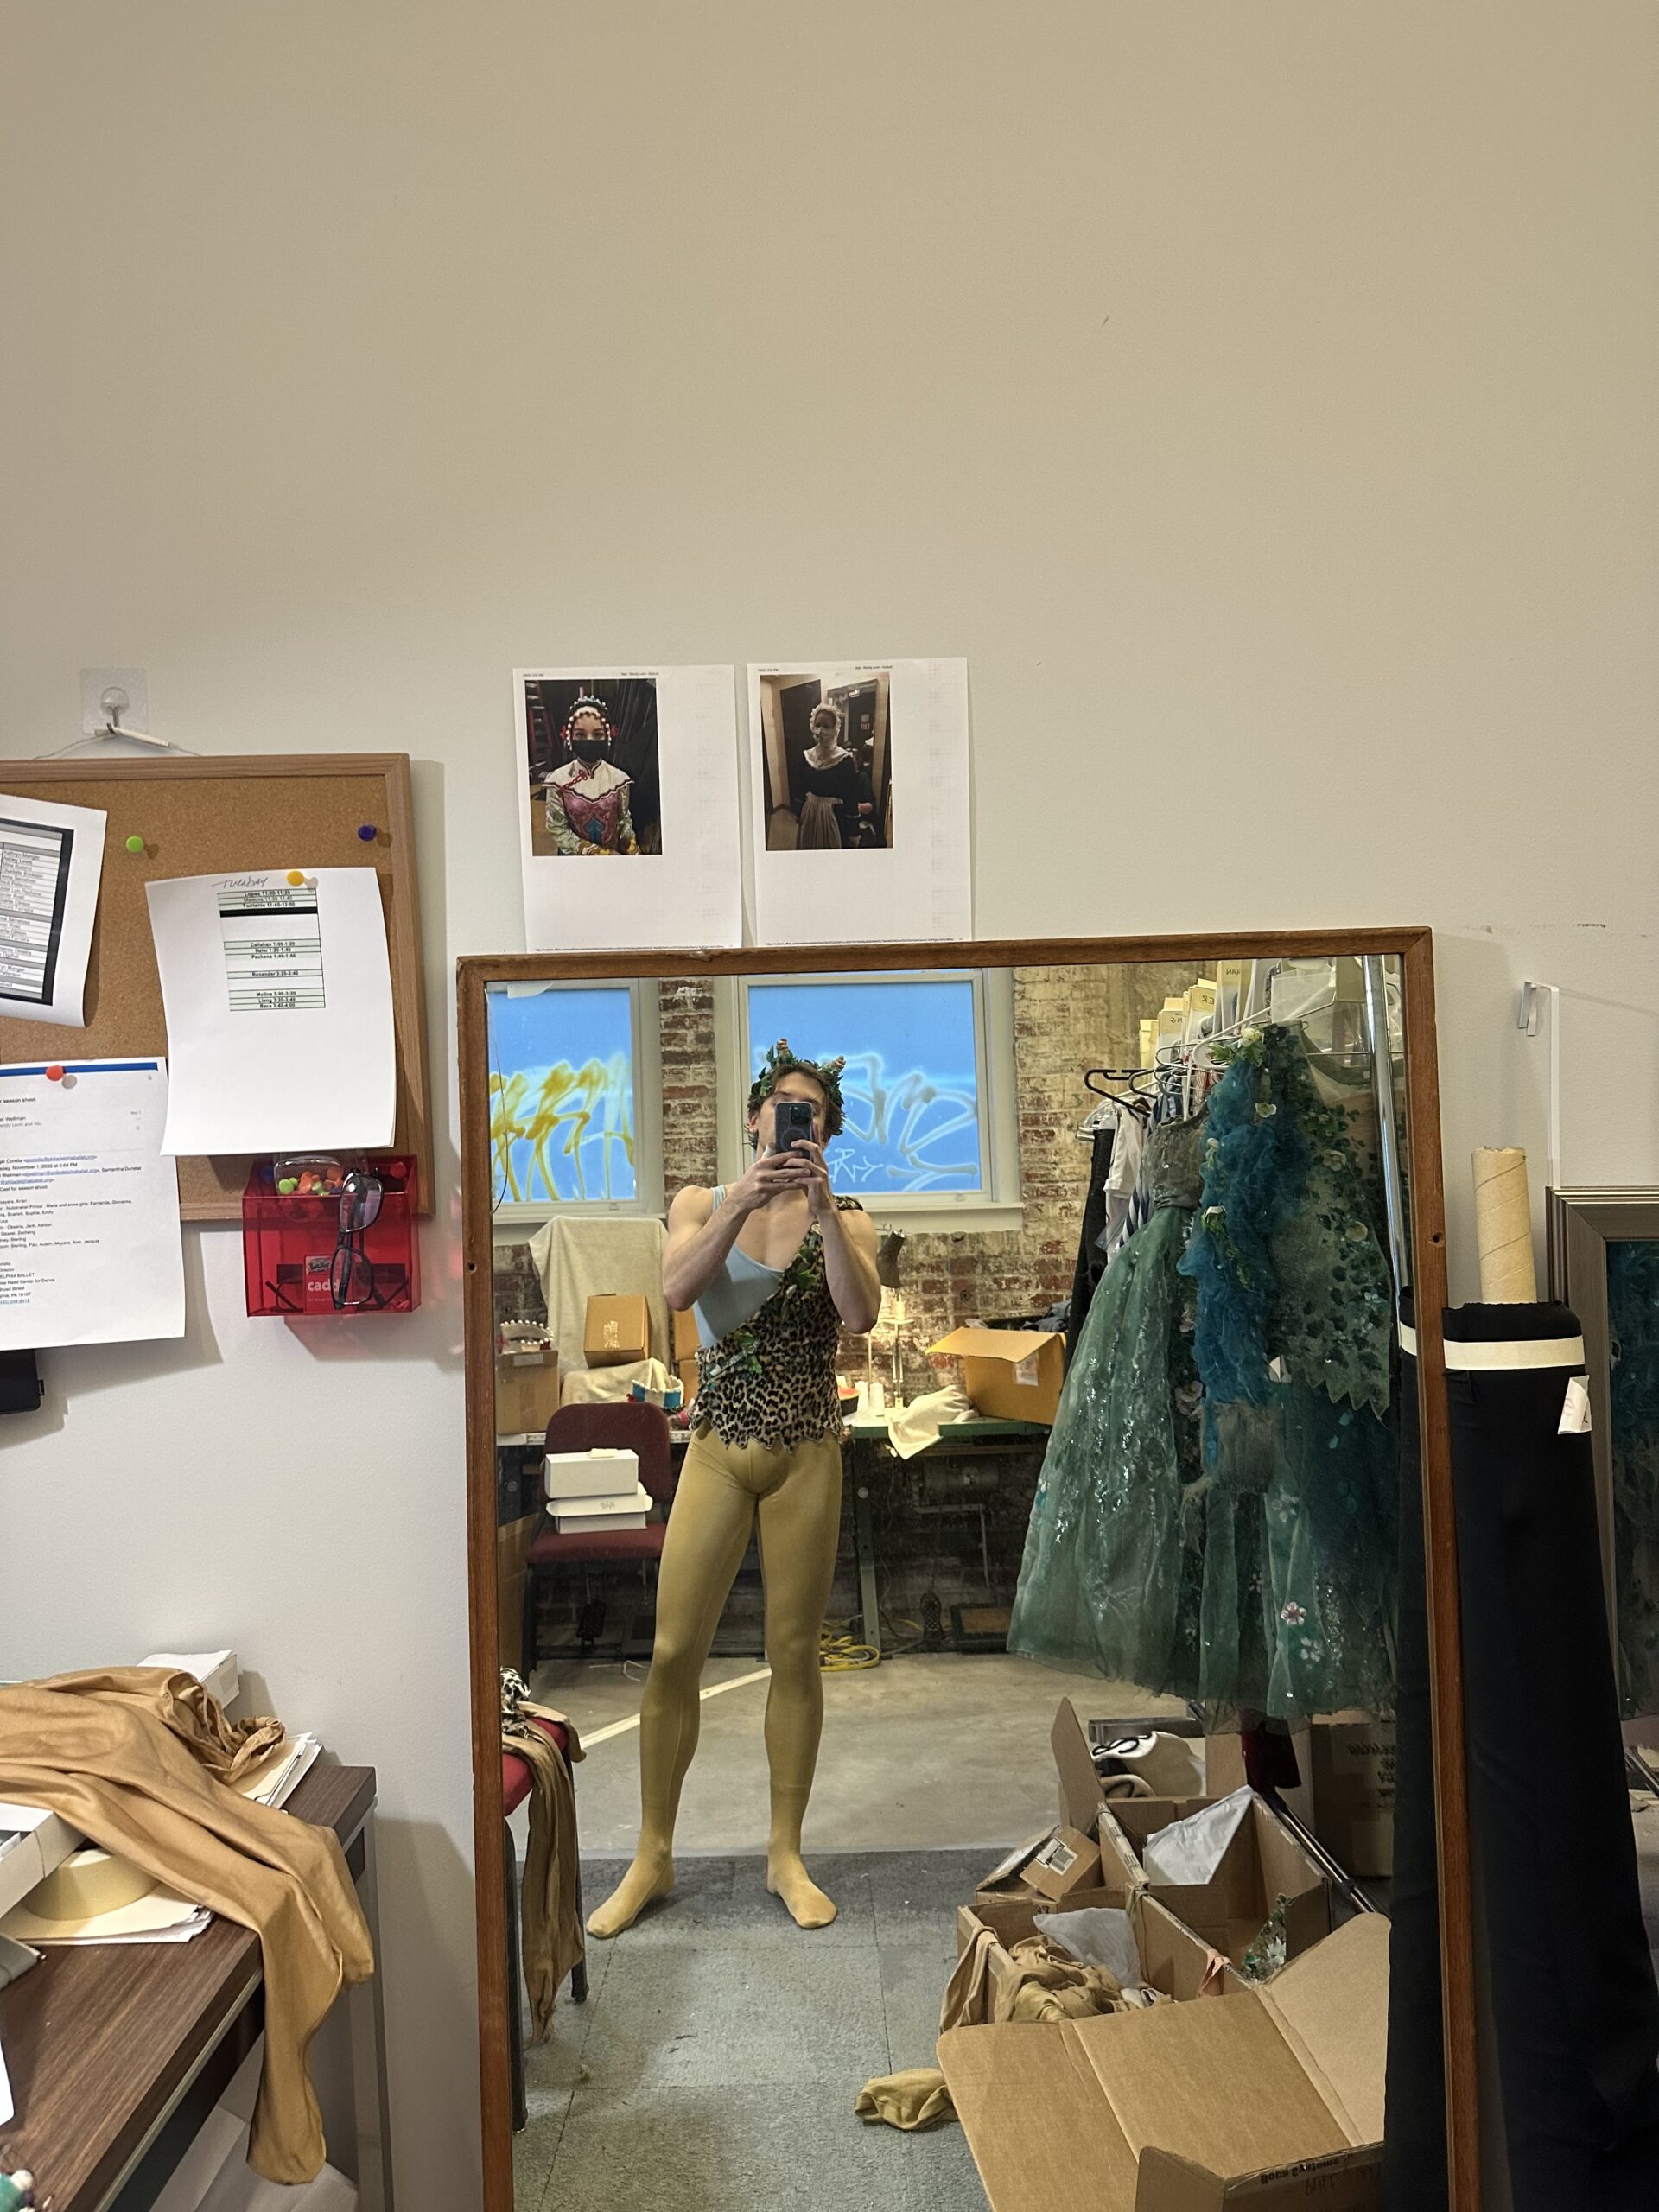 Ashton Roxander takes a selfie in his Puck costume, posing in front of a mirror that's resting on the floor of a wardrobe room. He wears a one-shouldered, leopard-print toga top with leaves trimming the edges, mustard-colored tights, and a headpiece with two small horns. He stands next to a clothing rack lined with blue-green costumes and cardboard boxes along the floor.